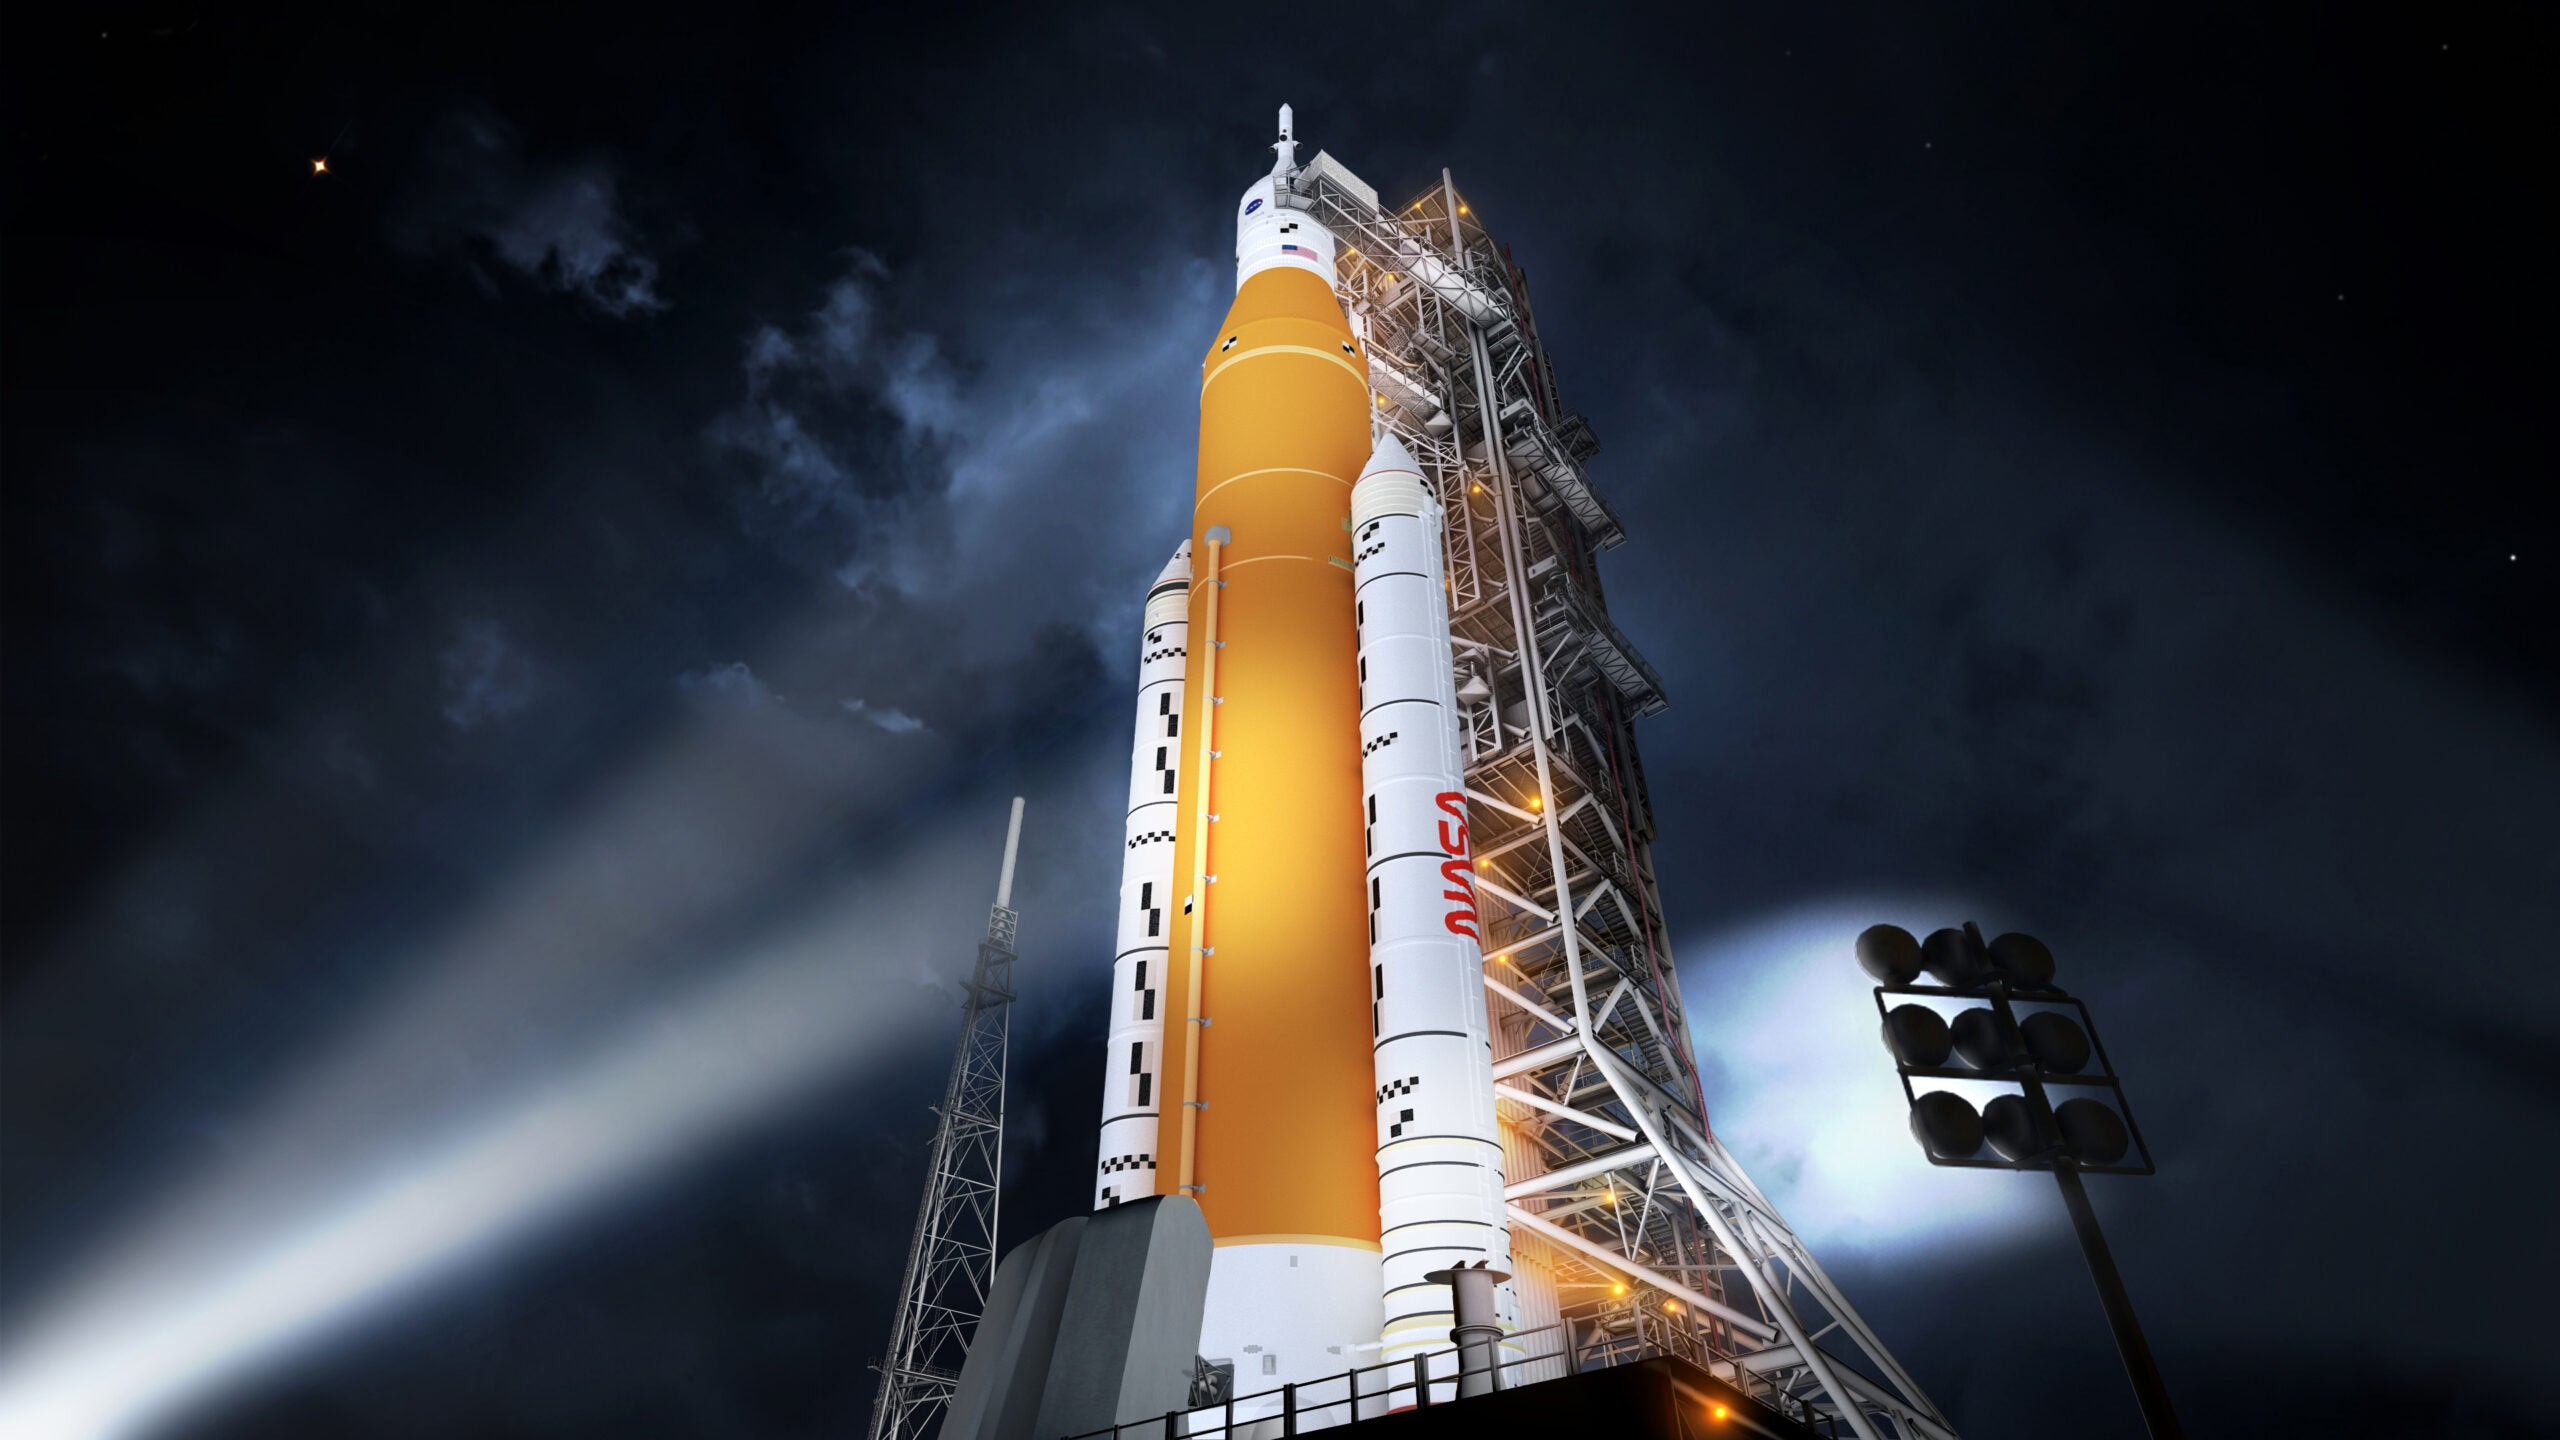 NASA’s Space Launch System Moves One Step Closer to First Launch